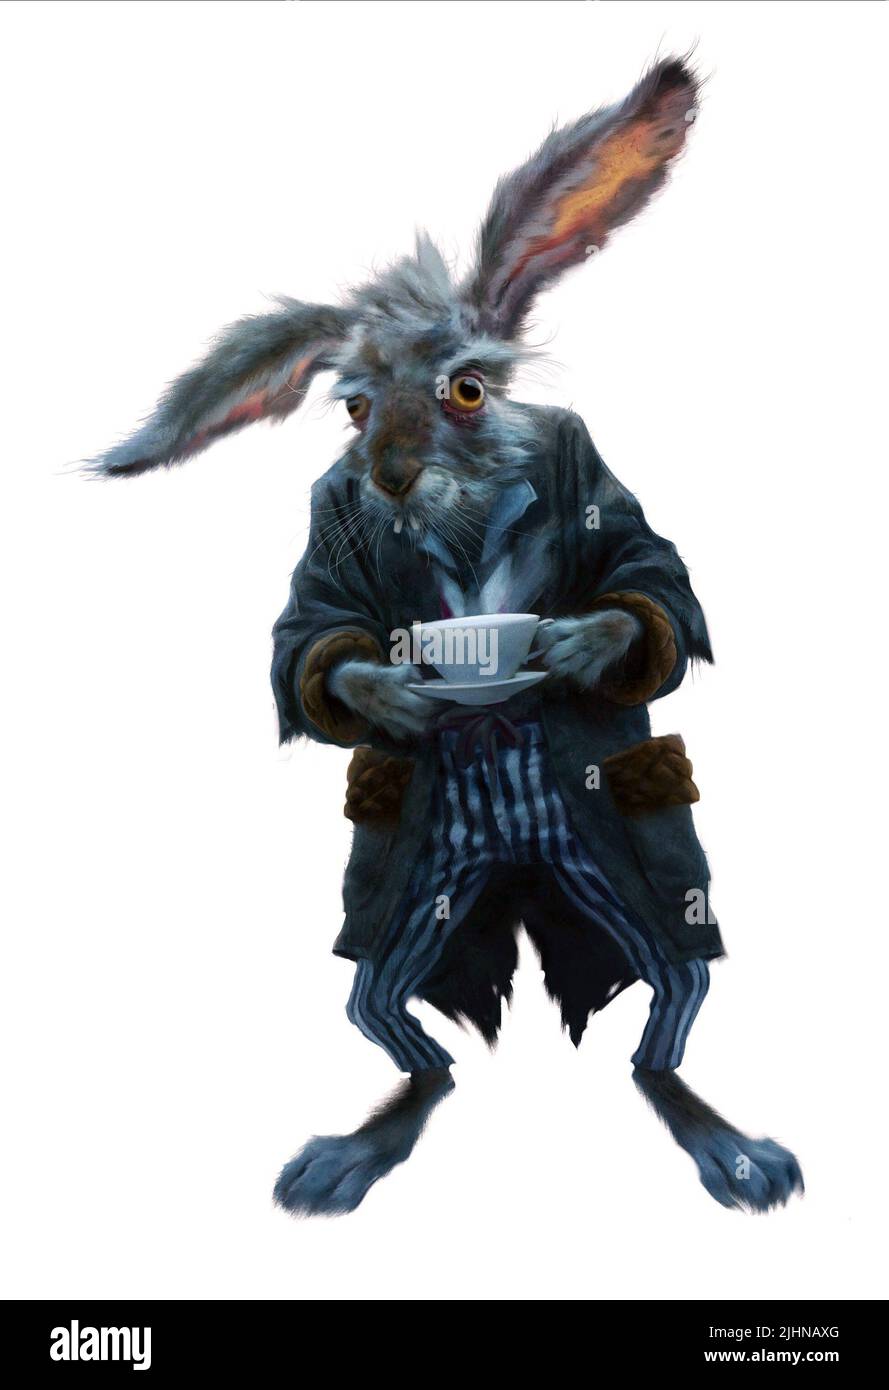 THE MARCH HARE, ALICE IN WONDERLAND, 2010 Stock Photo